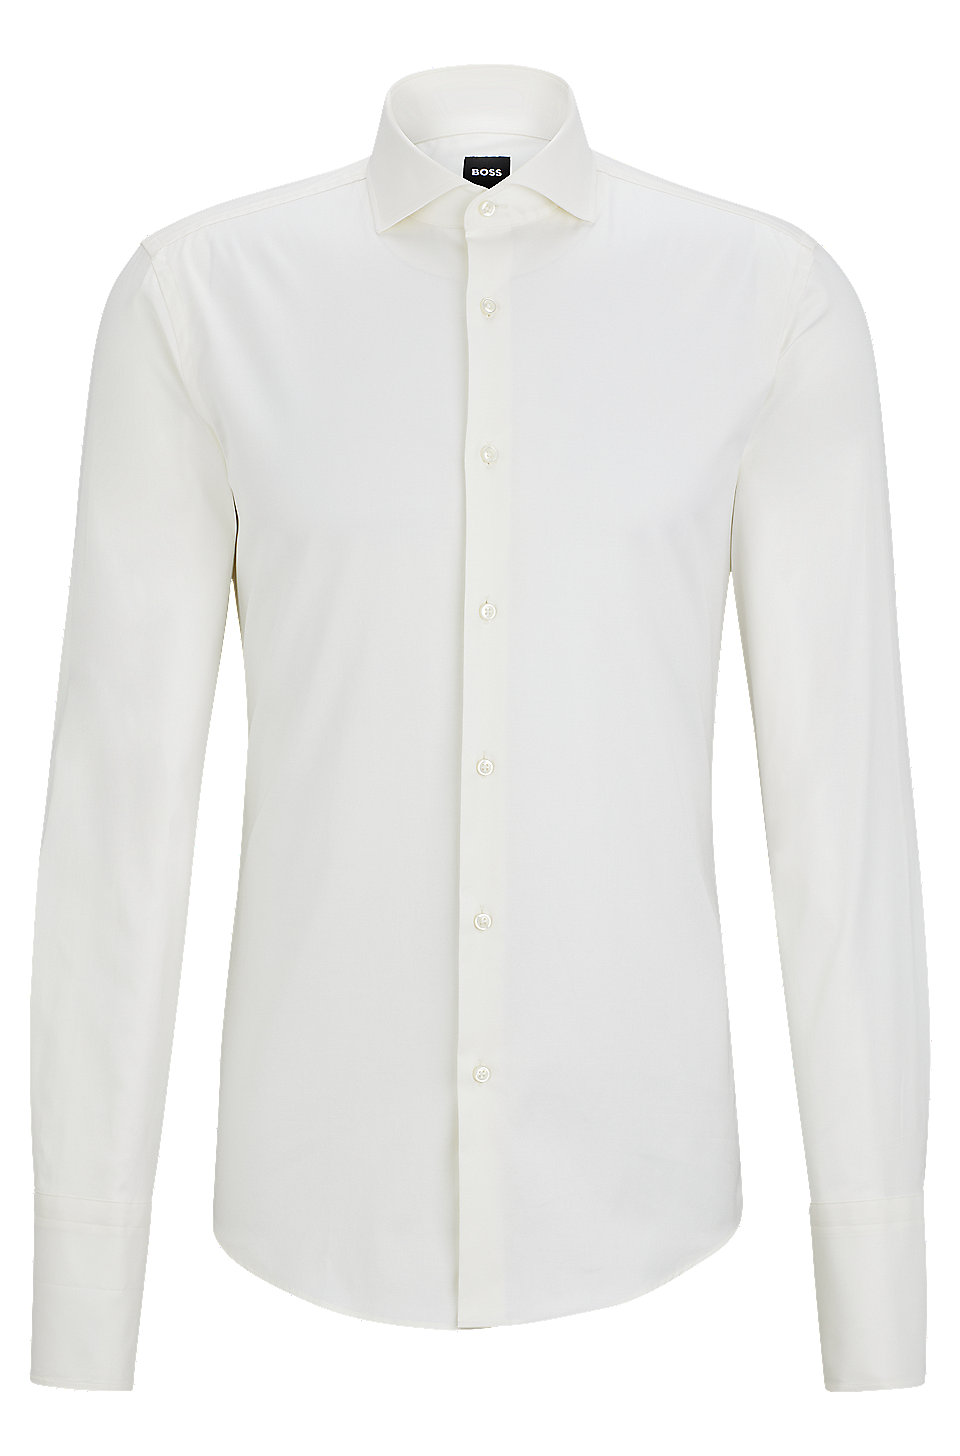 BOSS - Slim-fit shirt in stretch cotton with double cuffs